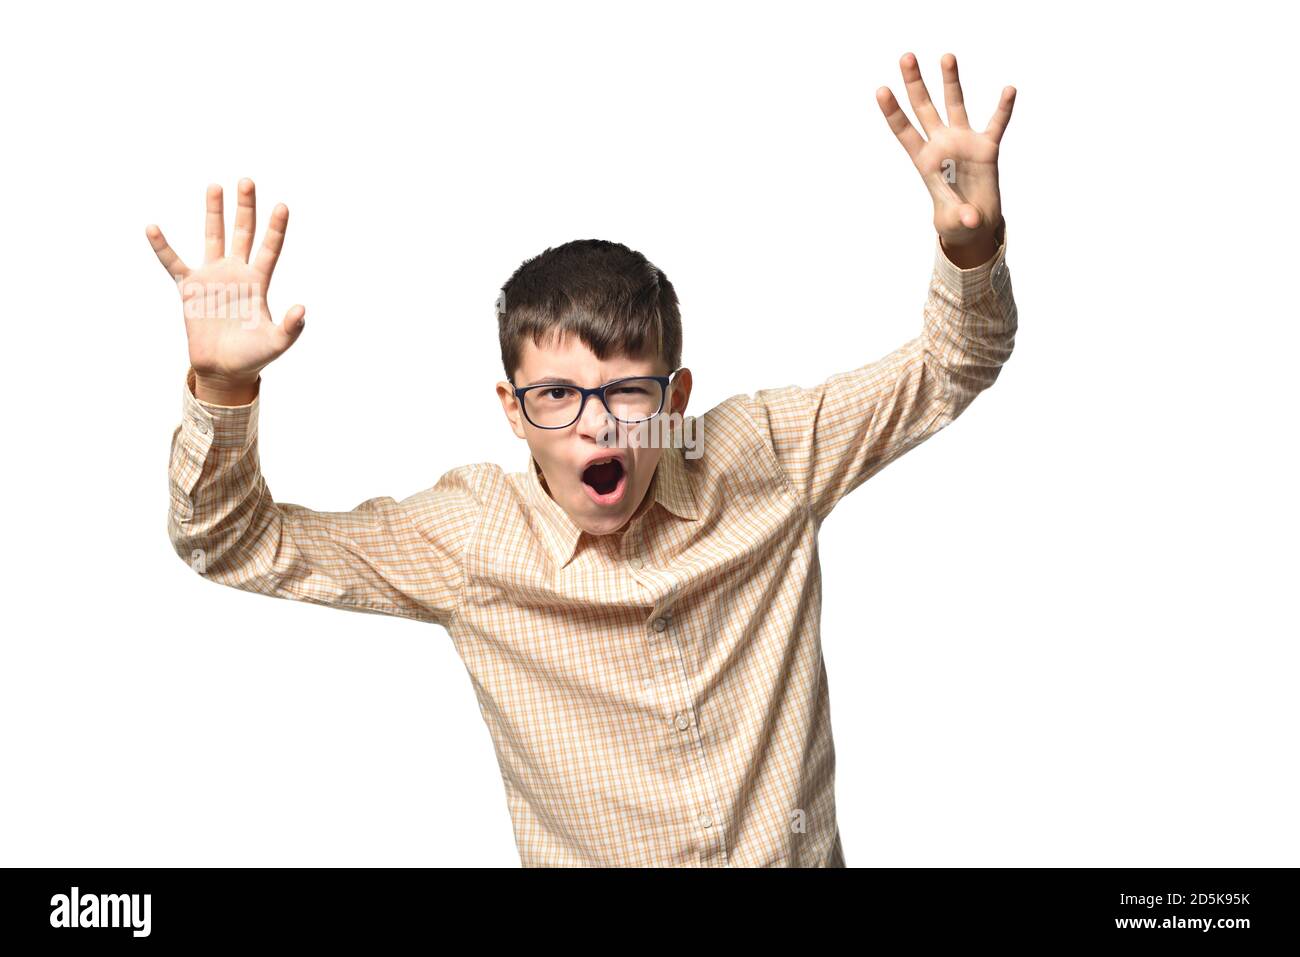 Cheerful boy of 13 years old, shows himself as a terrible monster and causes fright Stock Photo